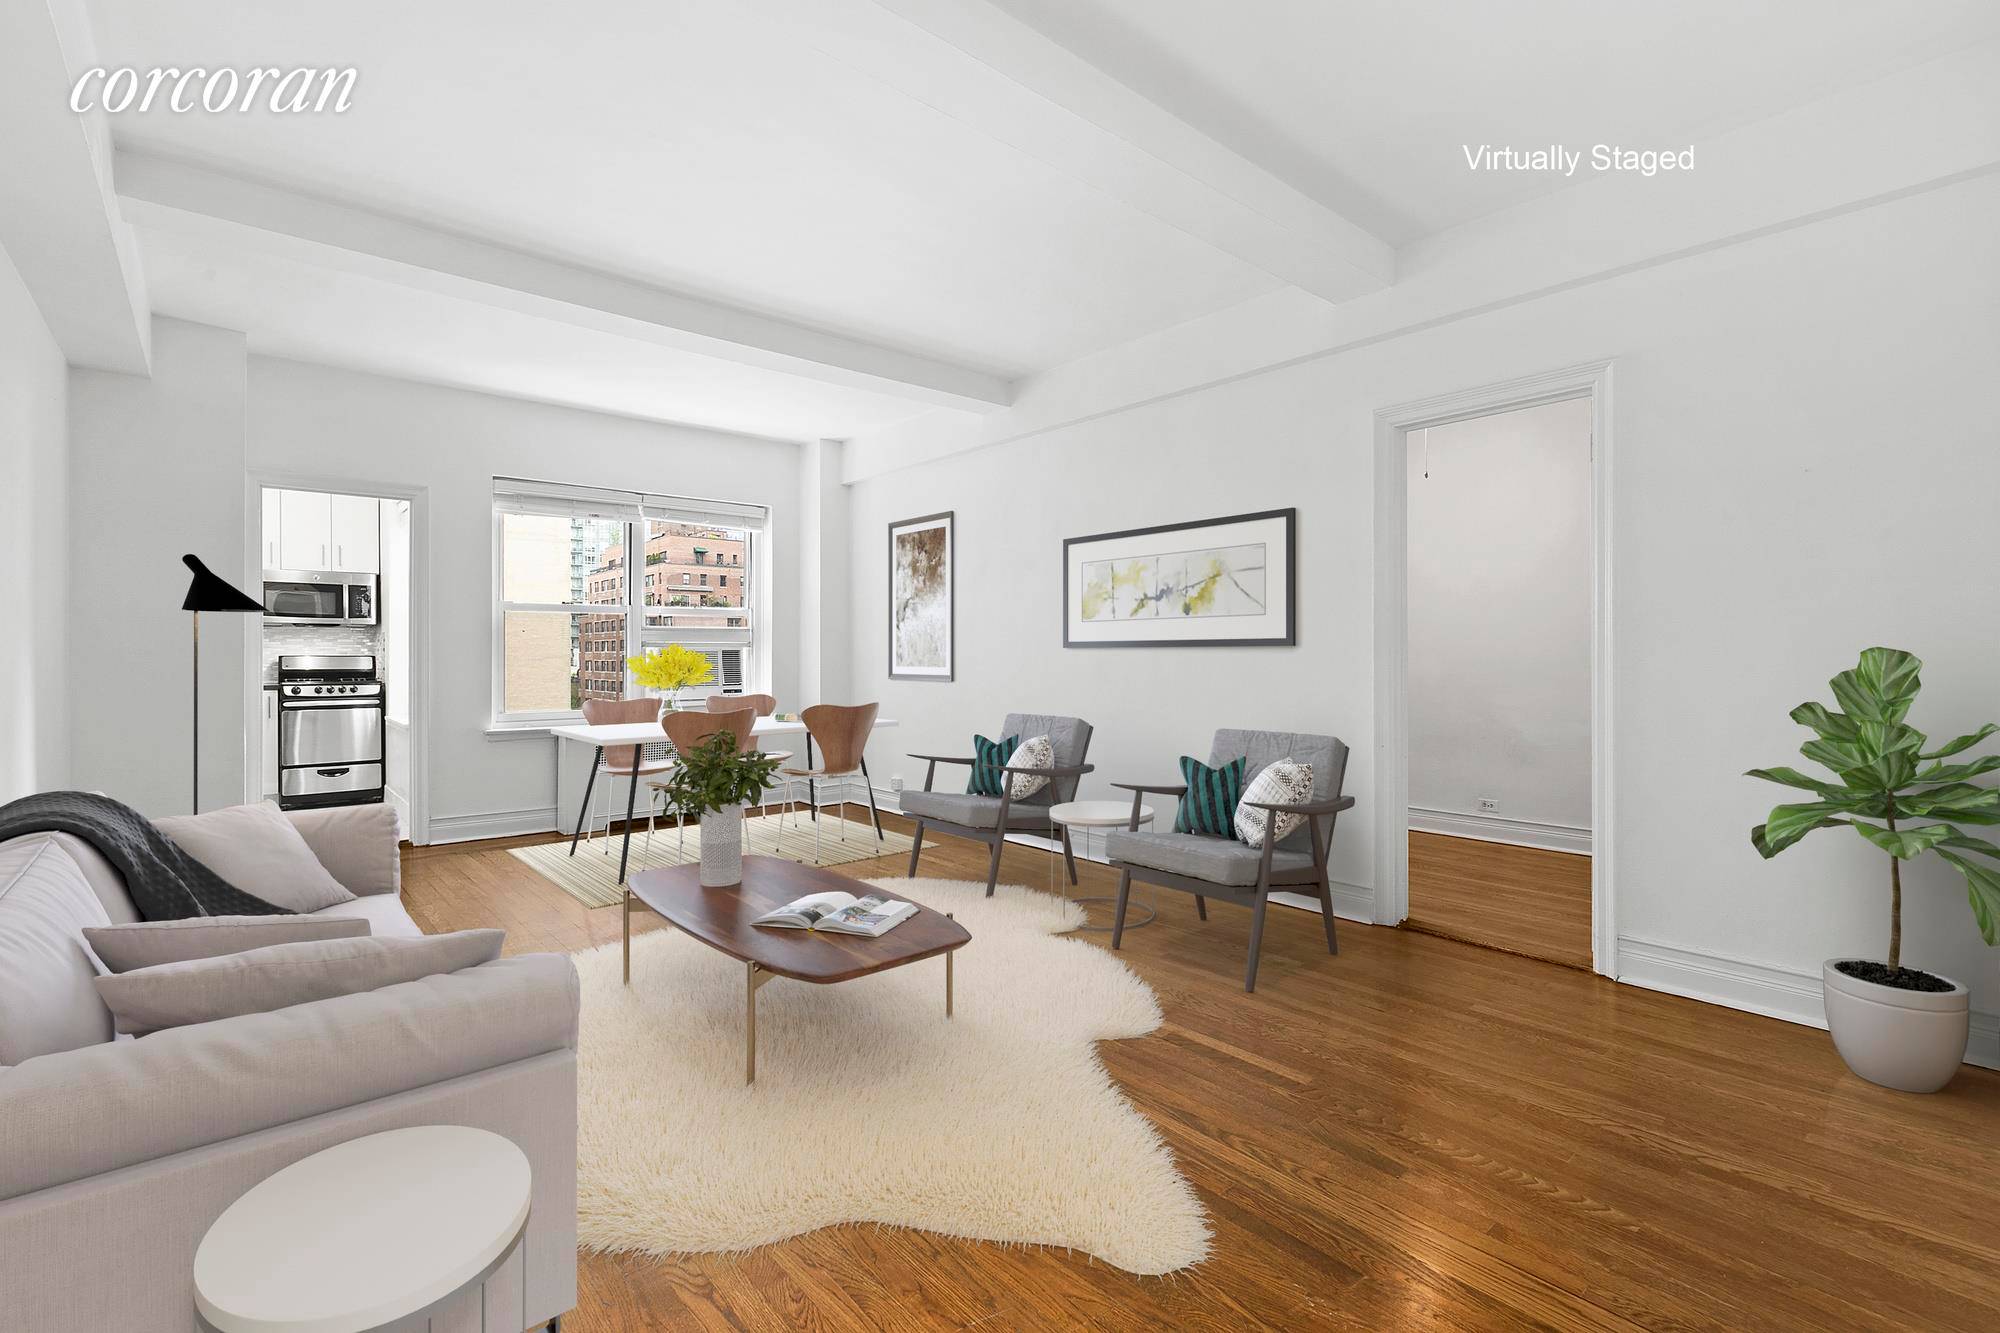 New Price Improvement ! Apartment 8E in Beekman is a bright and over sized studio with a separate area that can be used as a sleeping space or an office.